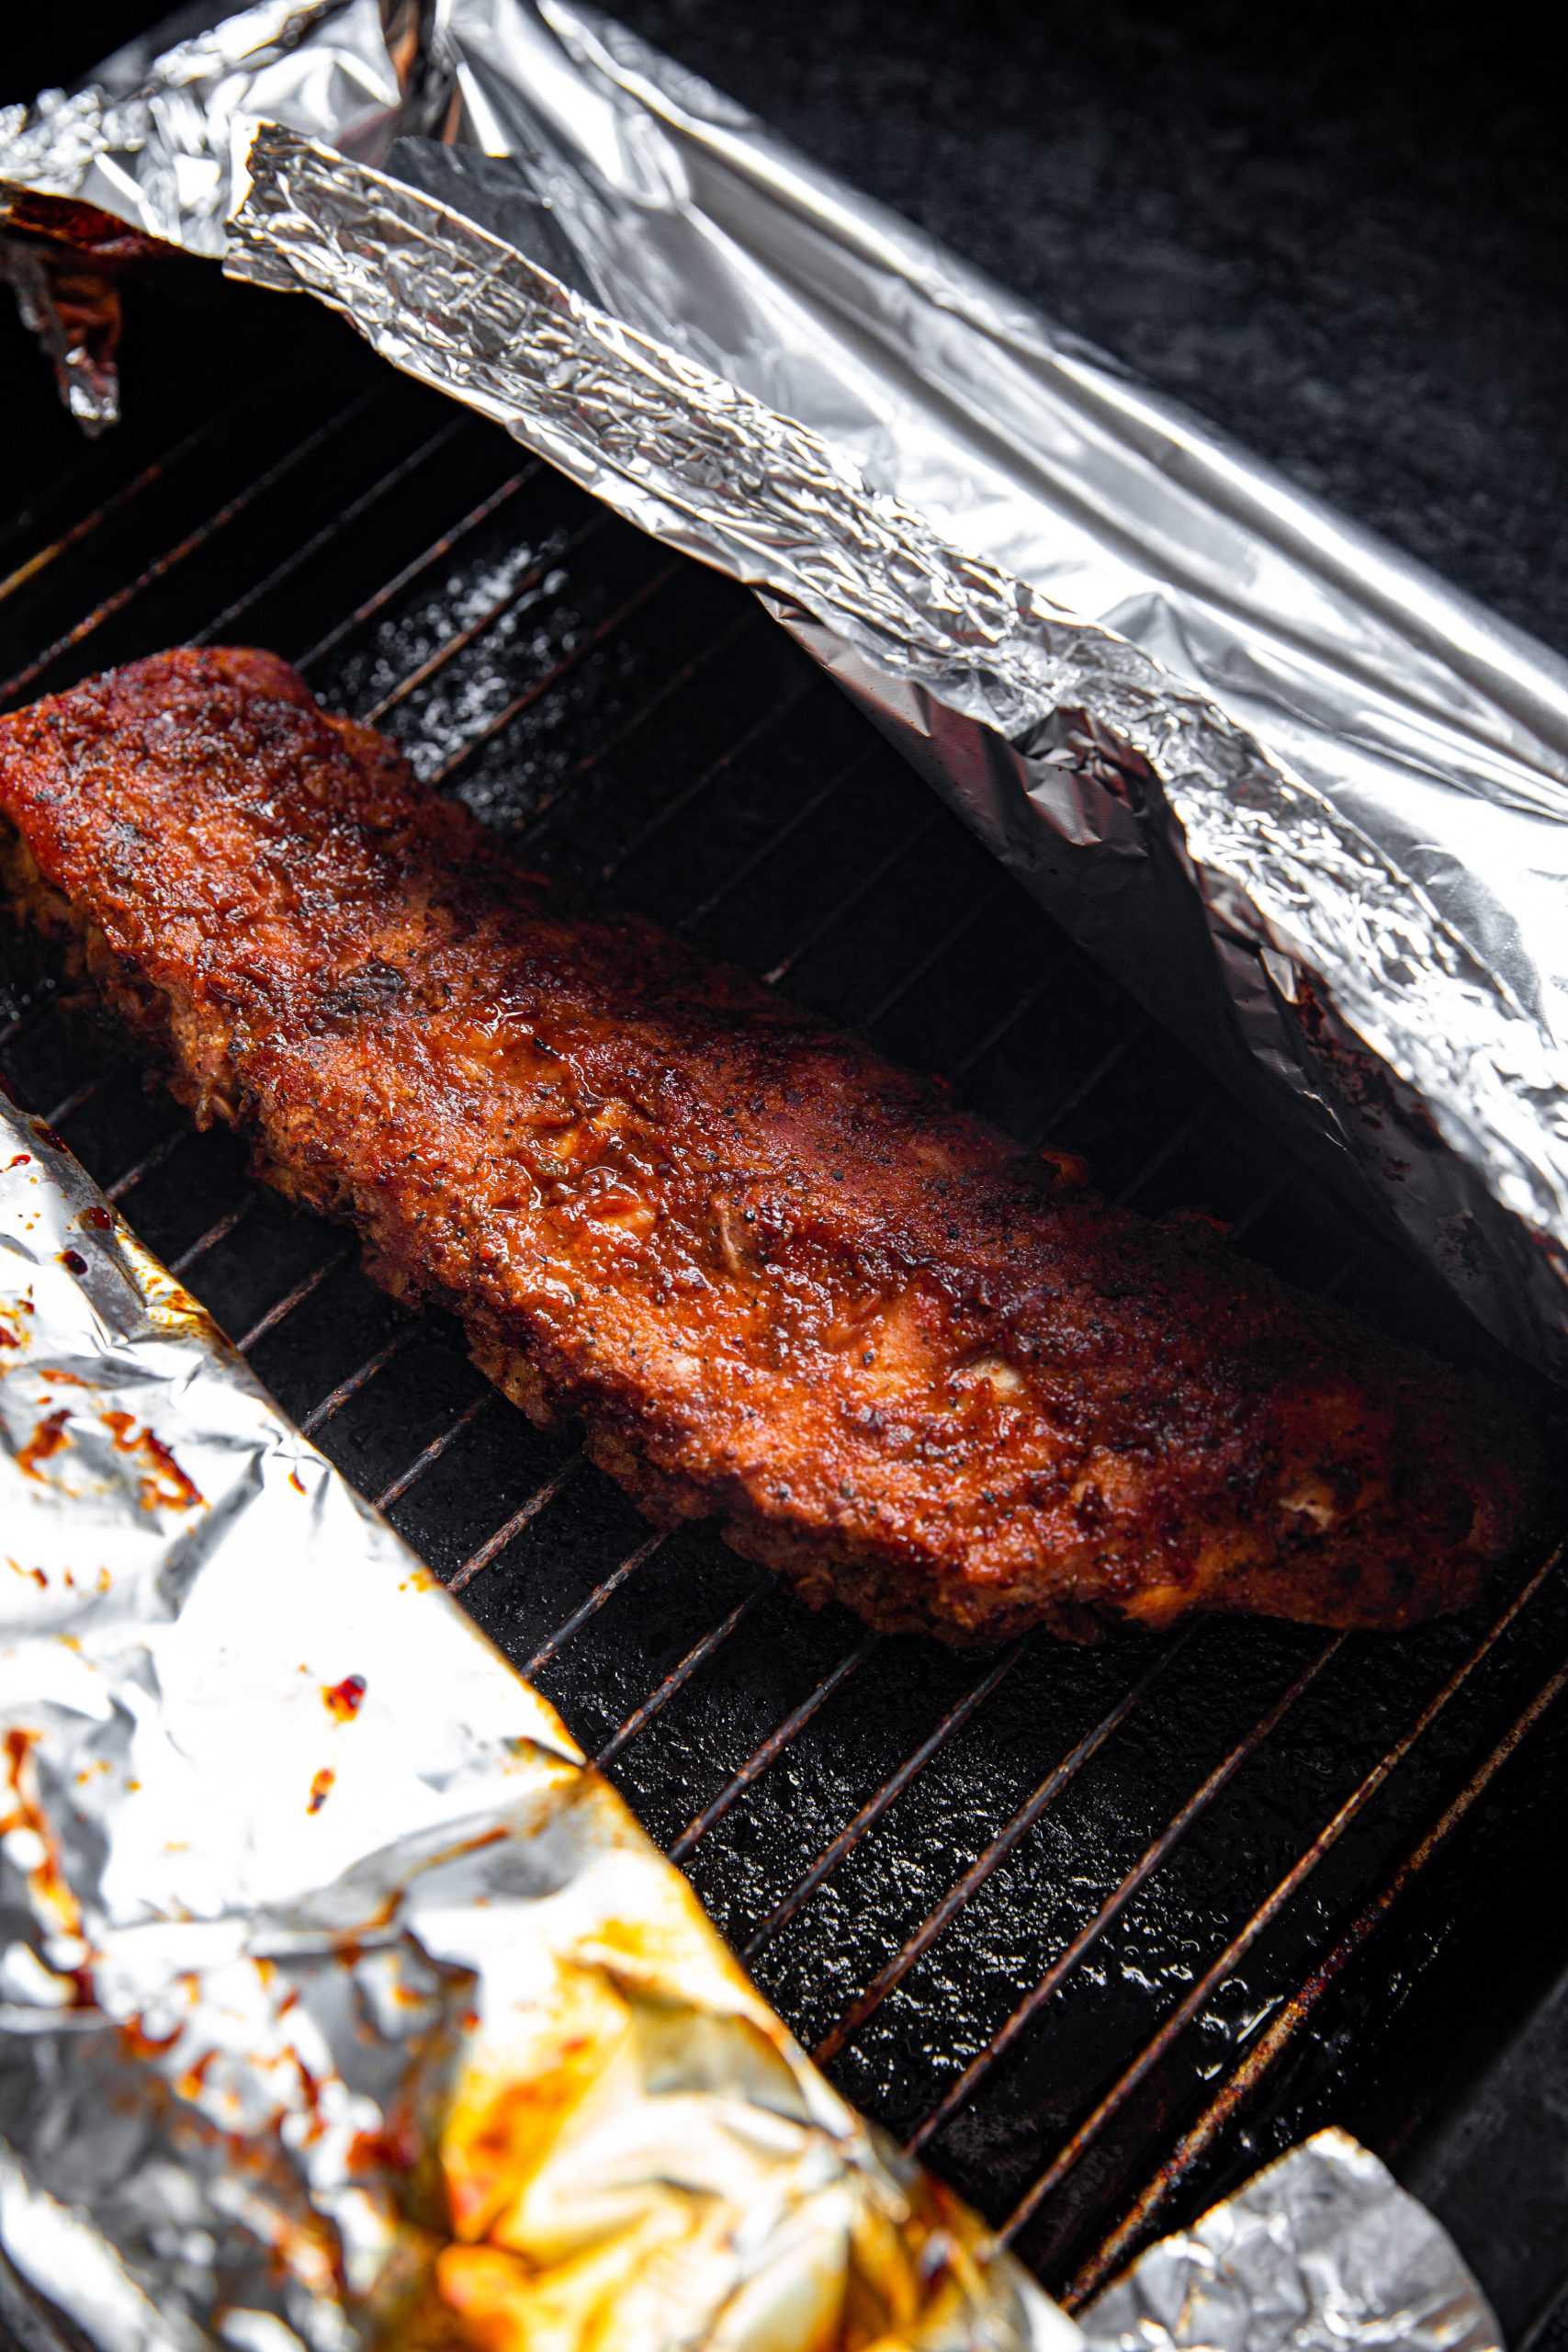 Baste ribs every 45 minutes as needed to keep moist.